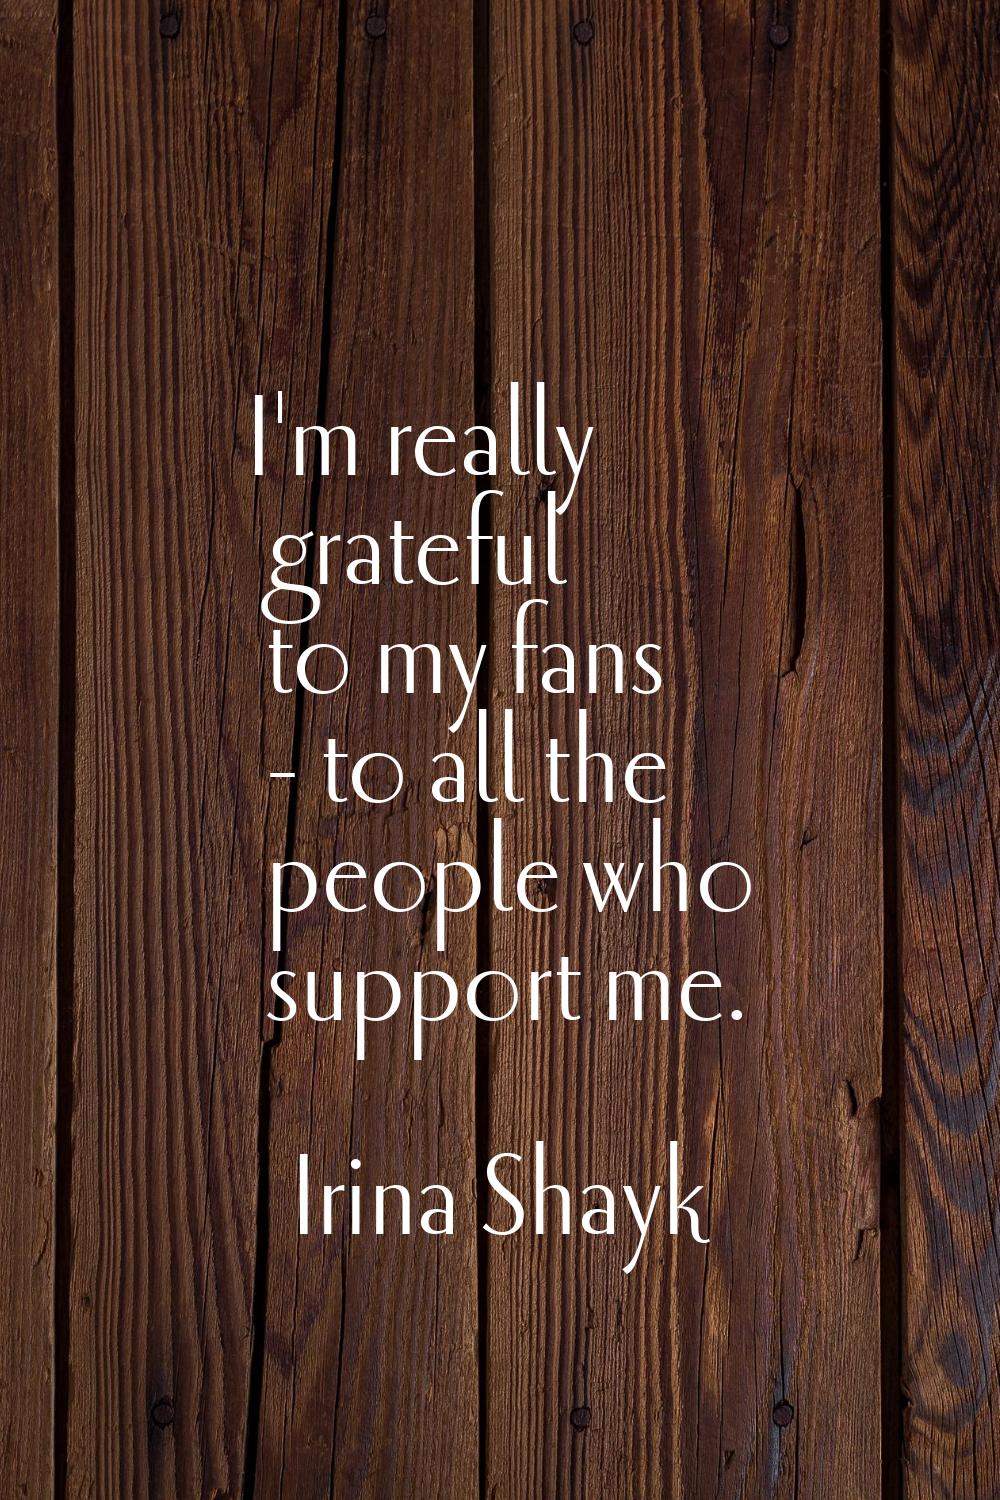 I'm really grateful to my fans - to all the people who support me.